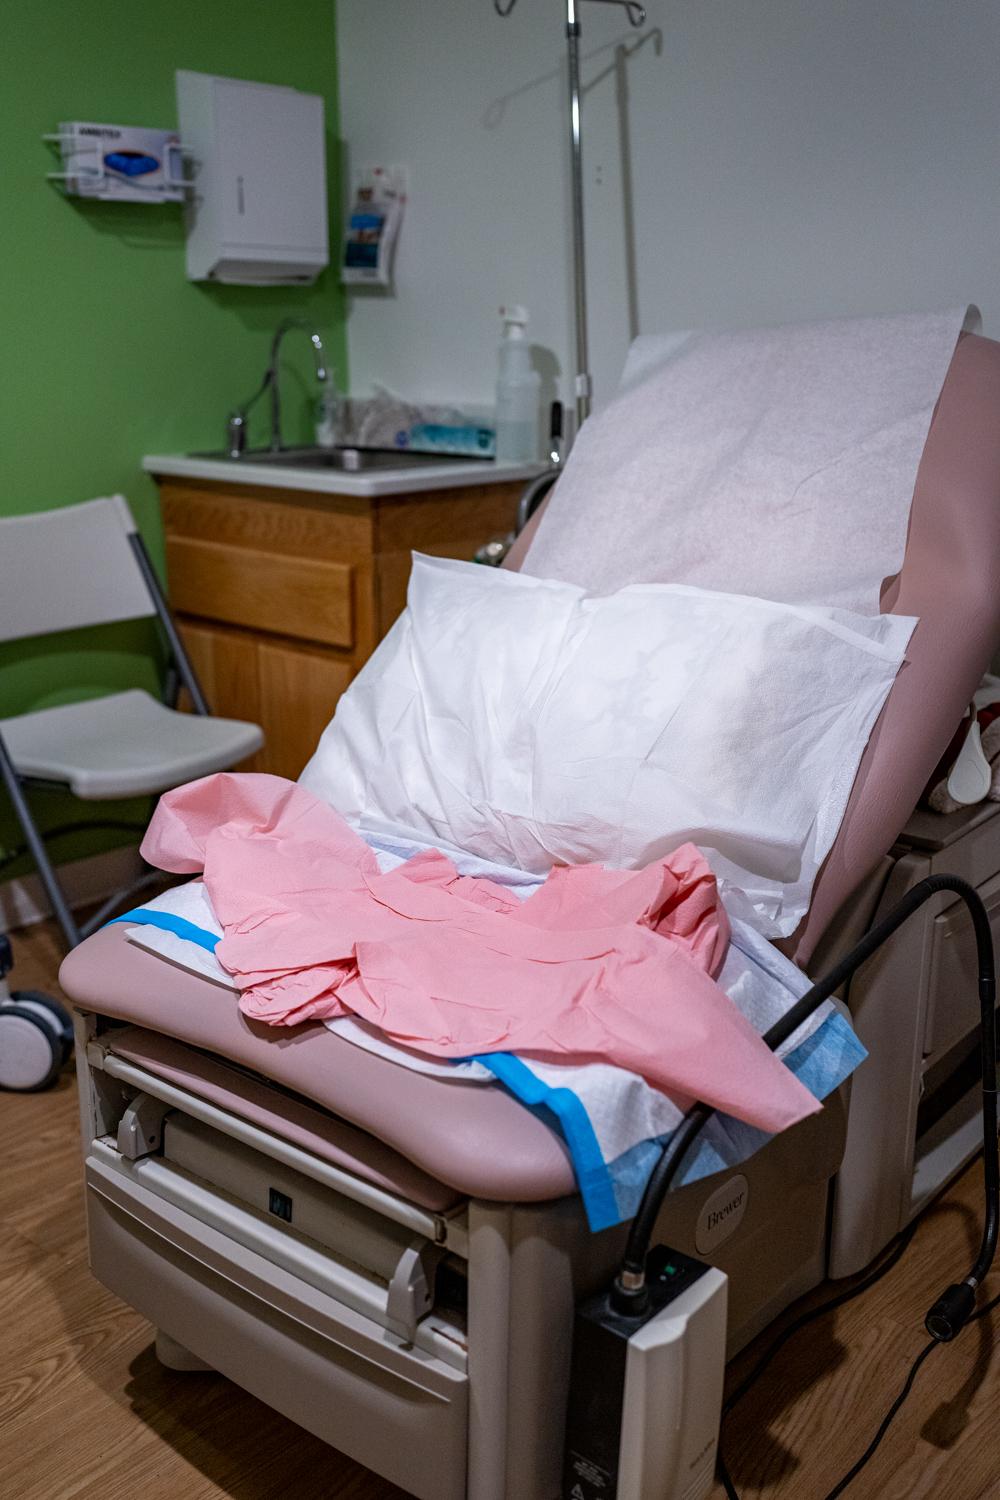 Wash Post - Women's Health - BANGOR, ME - SEPTEMBER 6TH: A room after a patient...